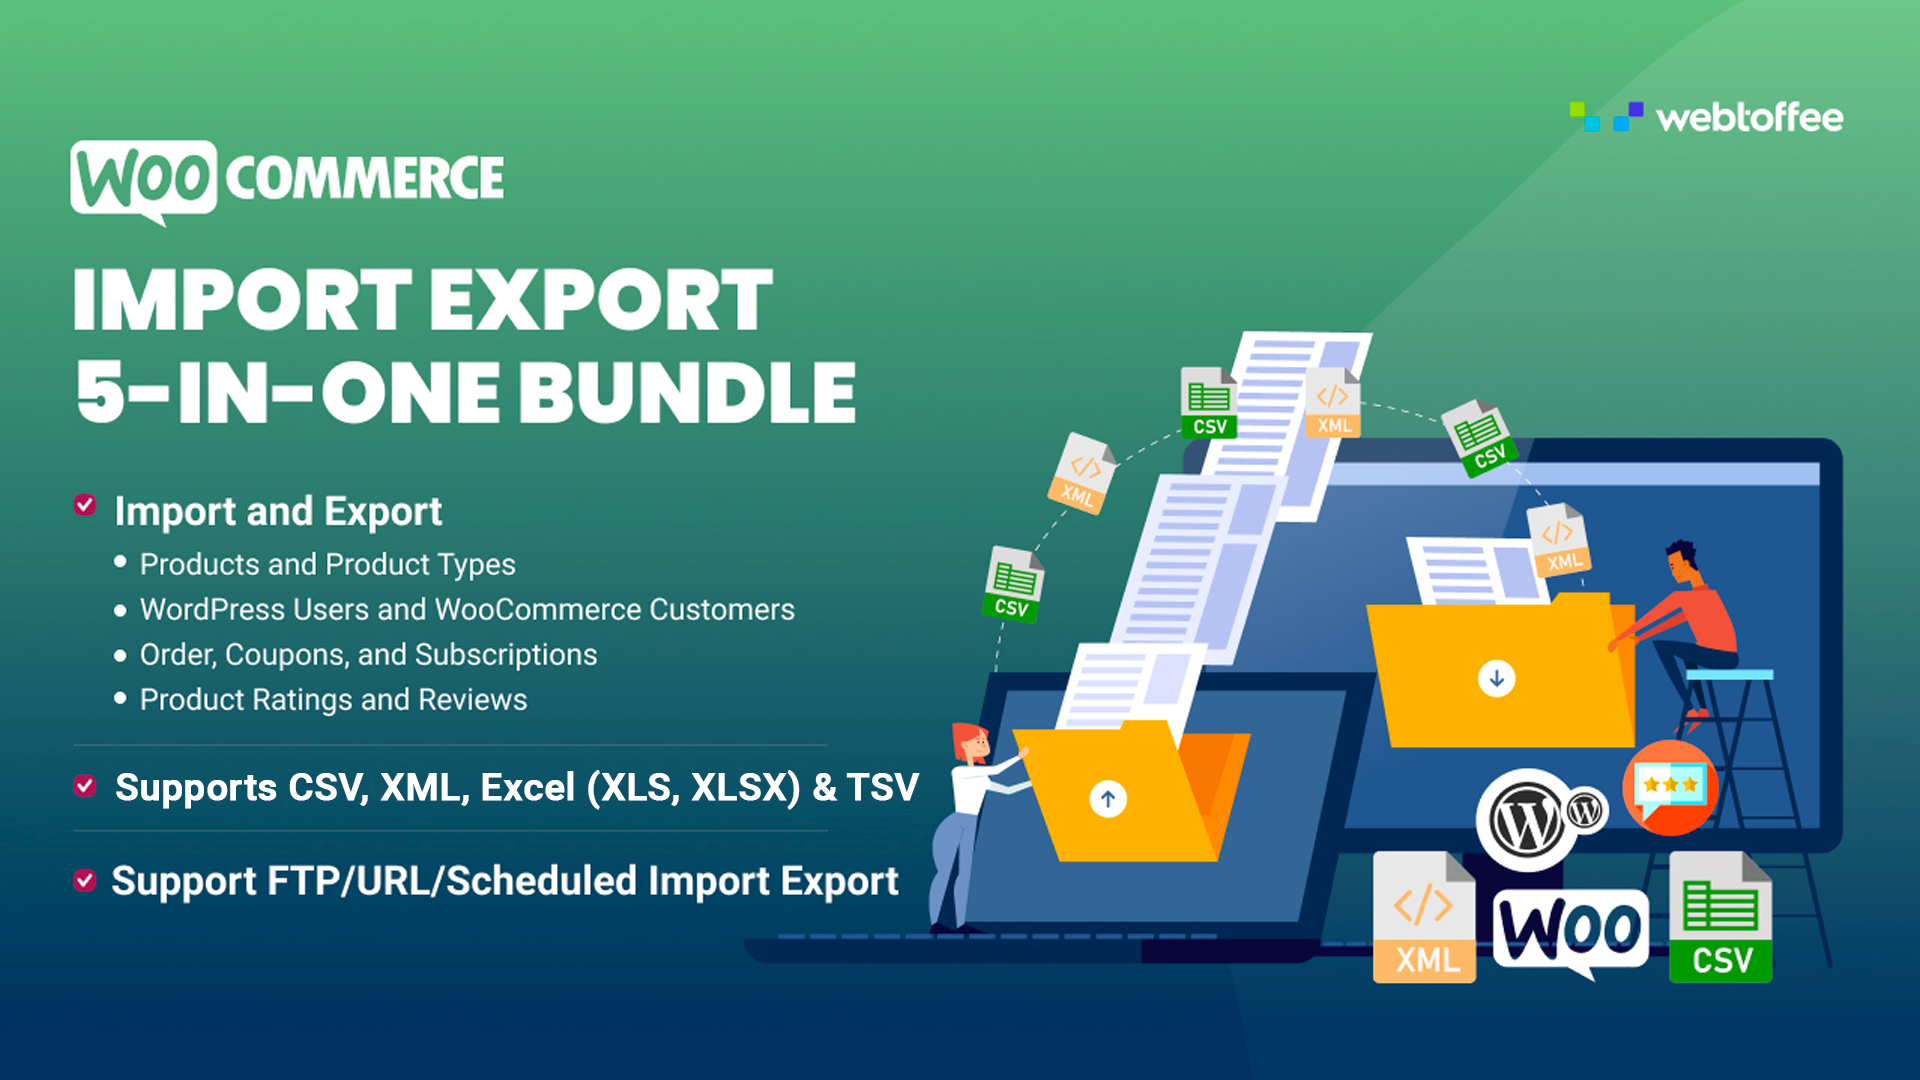 All-in-one WooCommerce Import Export Suite Nulled Free